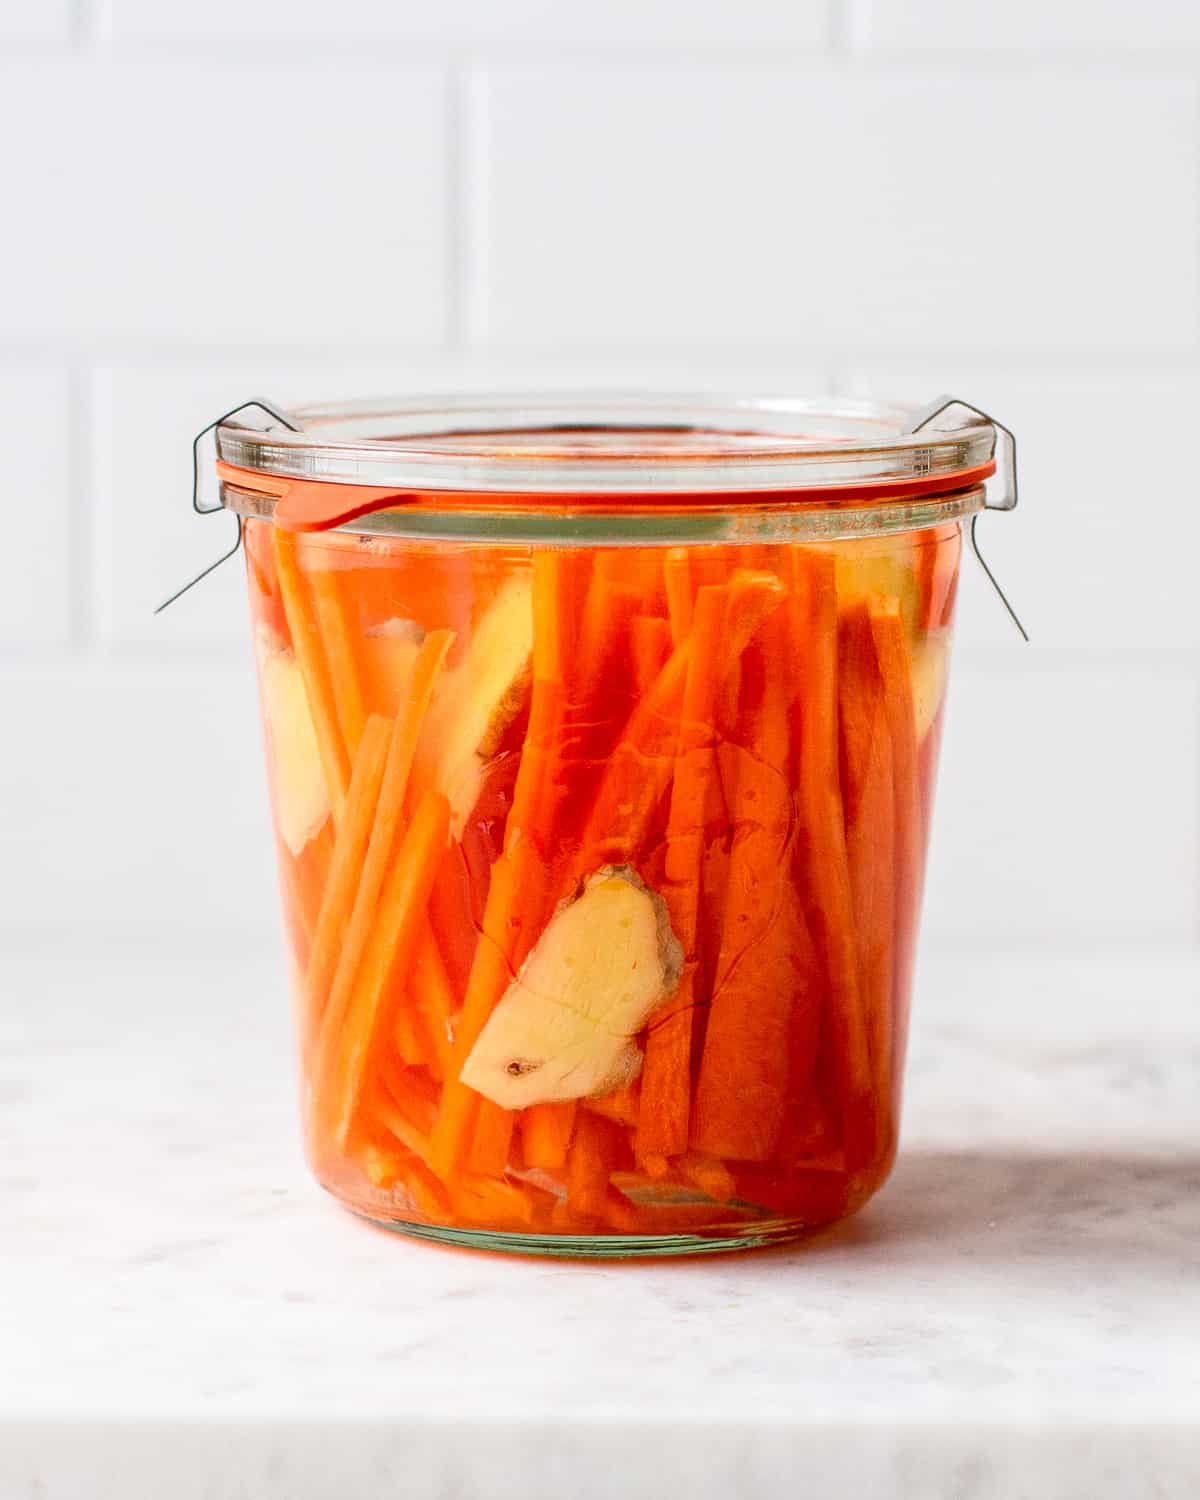 Closed Weck jar filled with carrot sticks, ginger slices and a vinegar pickling brine.